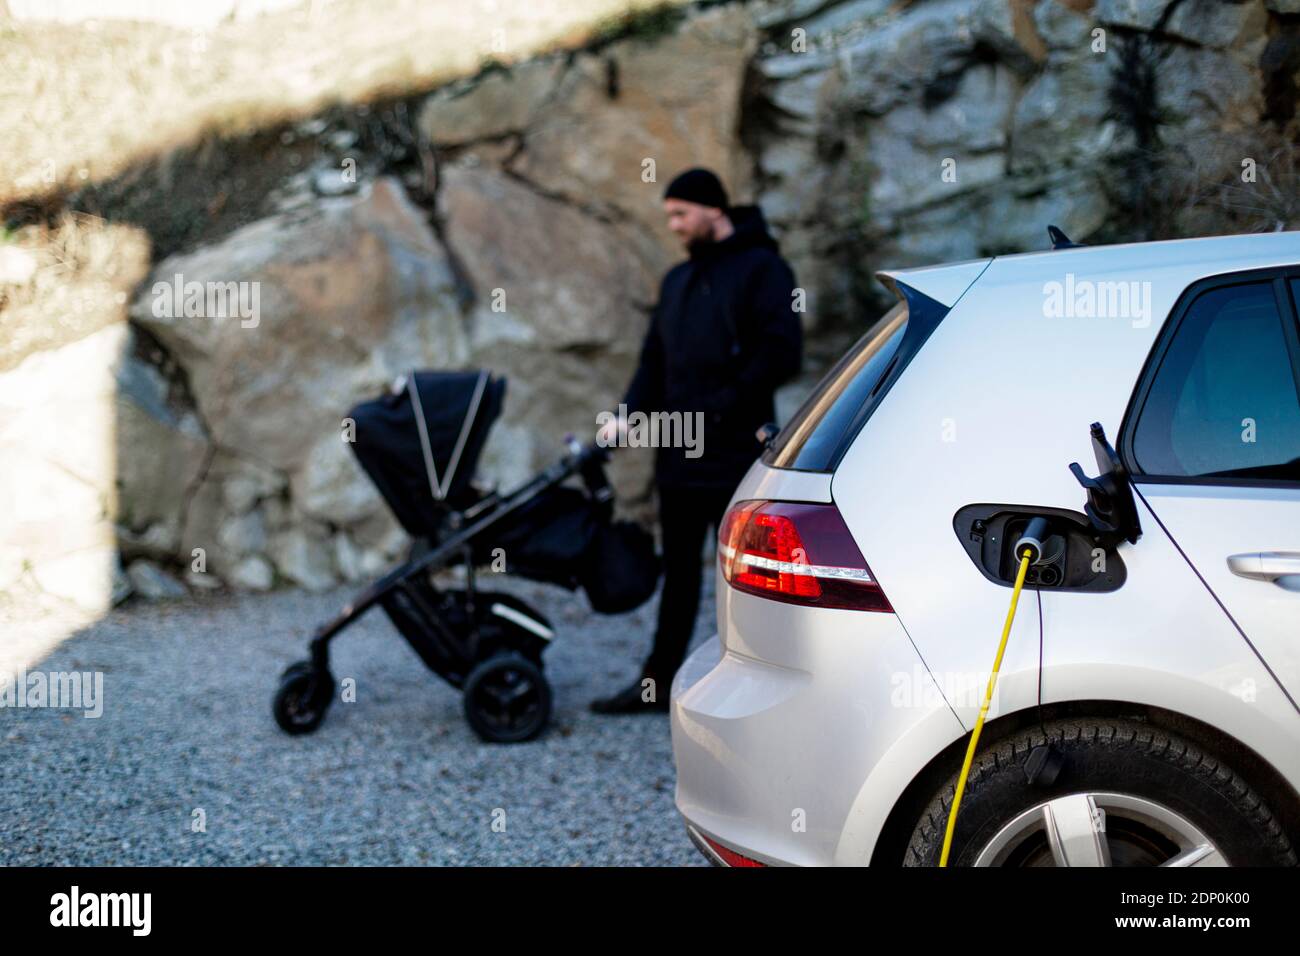 Electric car on charge, man with pram on background Stock Photo